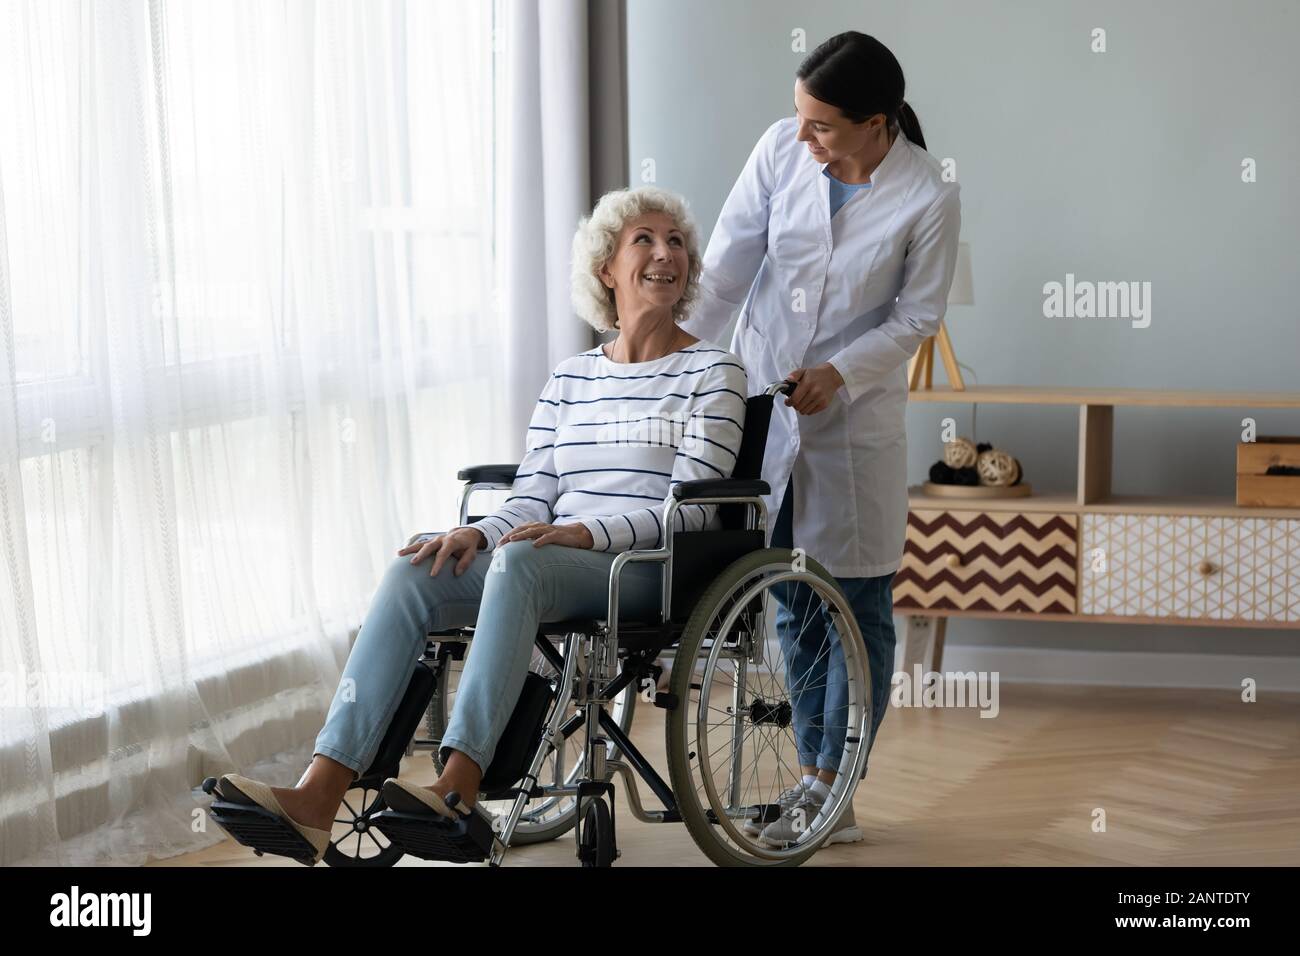 Caregiver helping disabled older woman in wheelchair at home Stock Photo